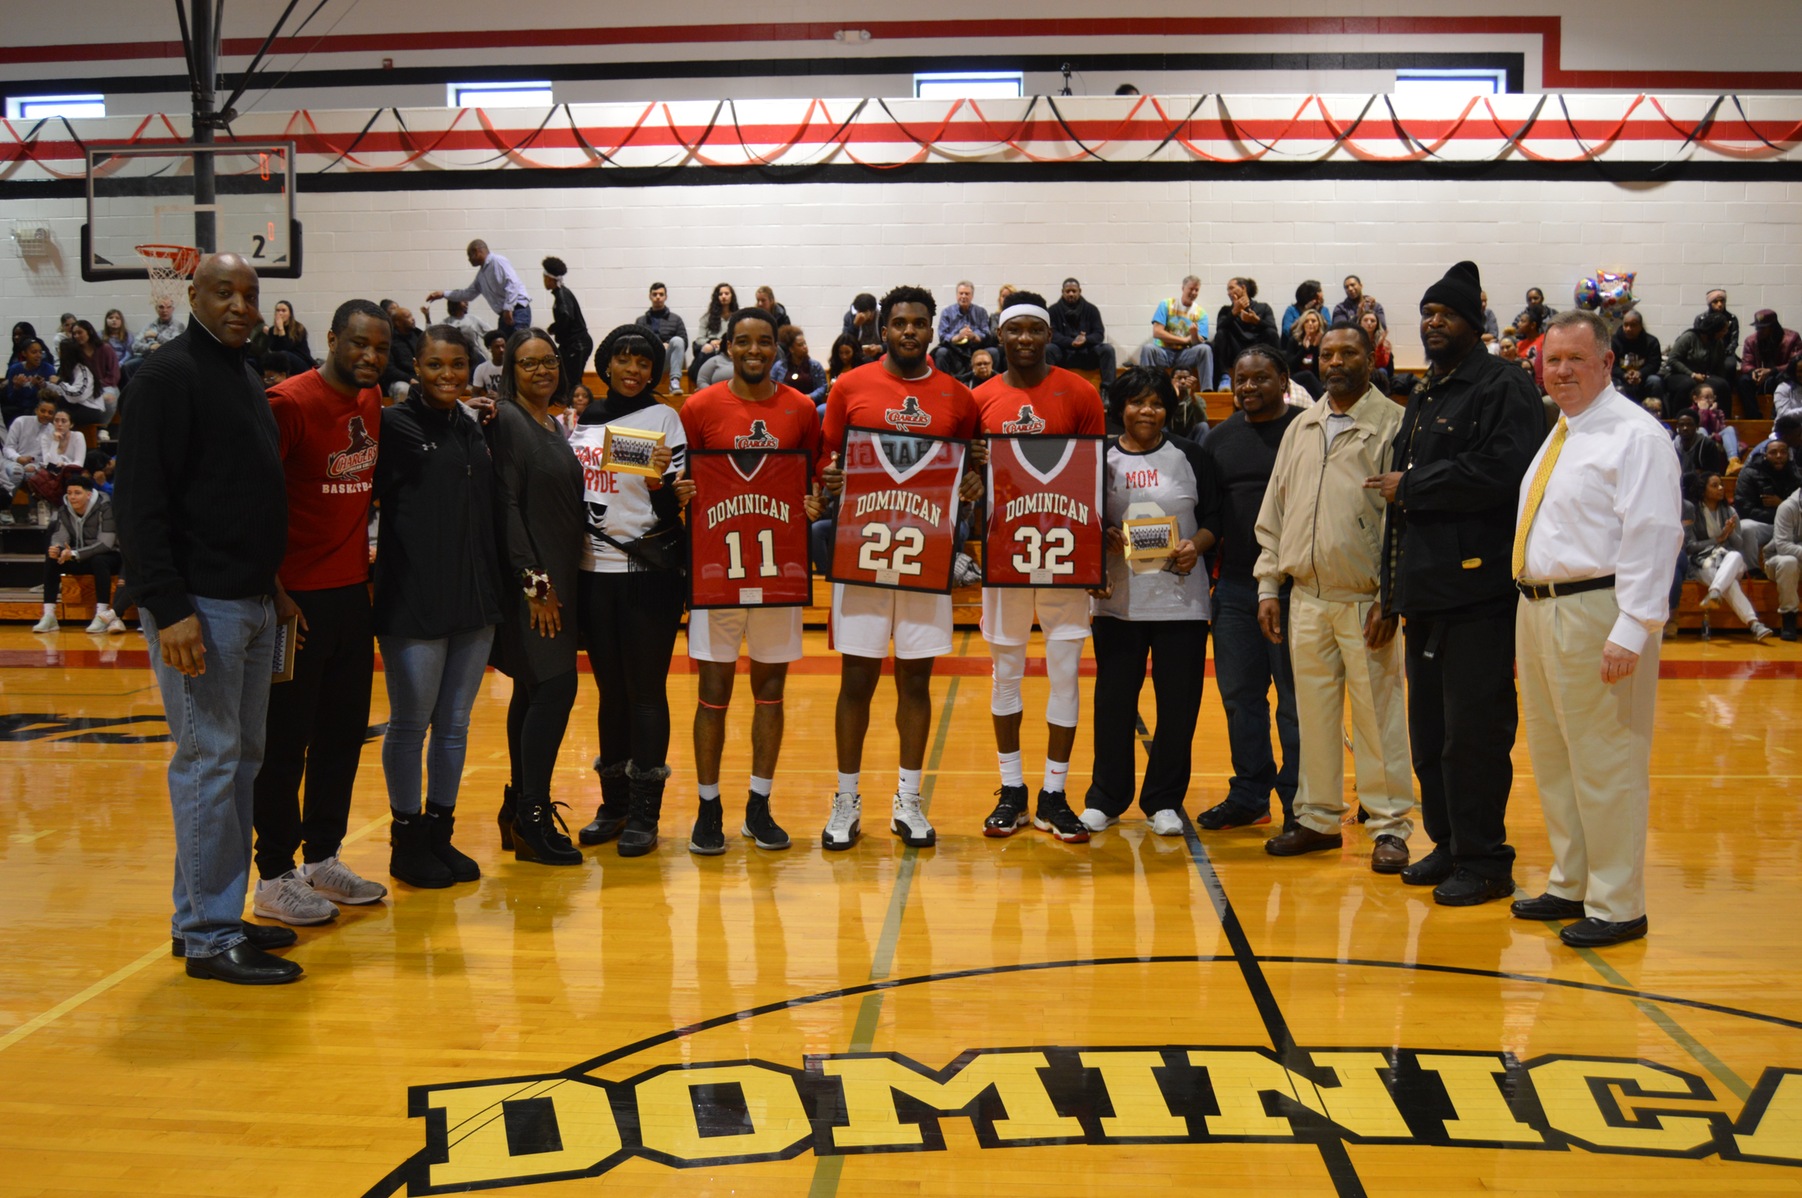 MEN'S BASKETBALL CLOSES OUT THE SEASON WITH A WIN ON SENIOR DAY